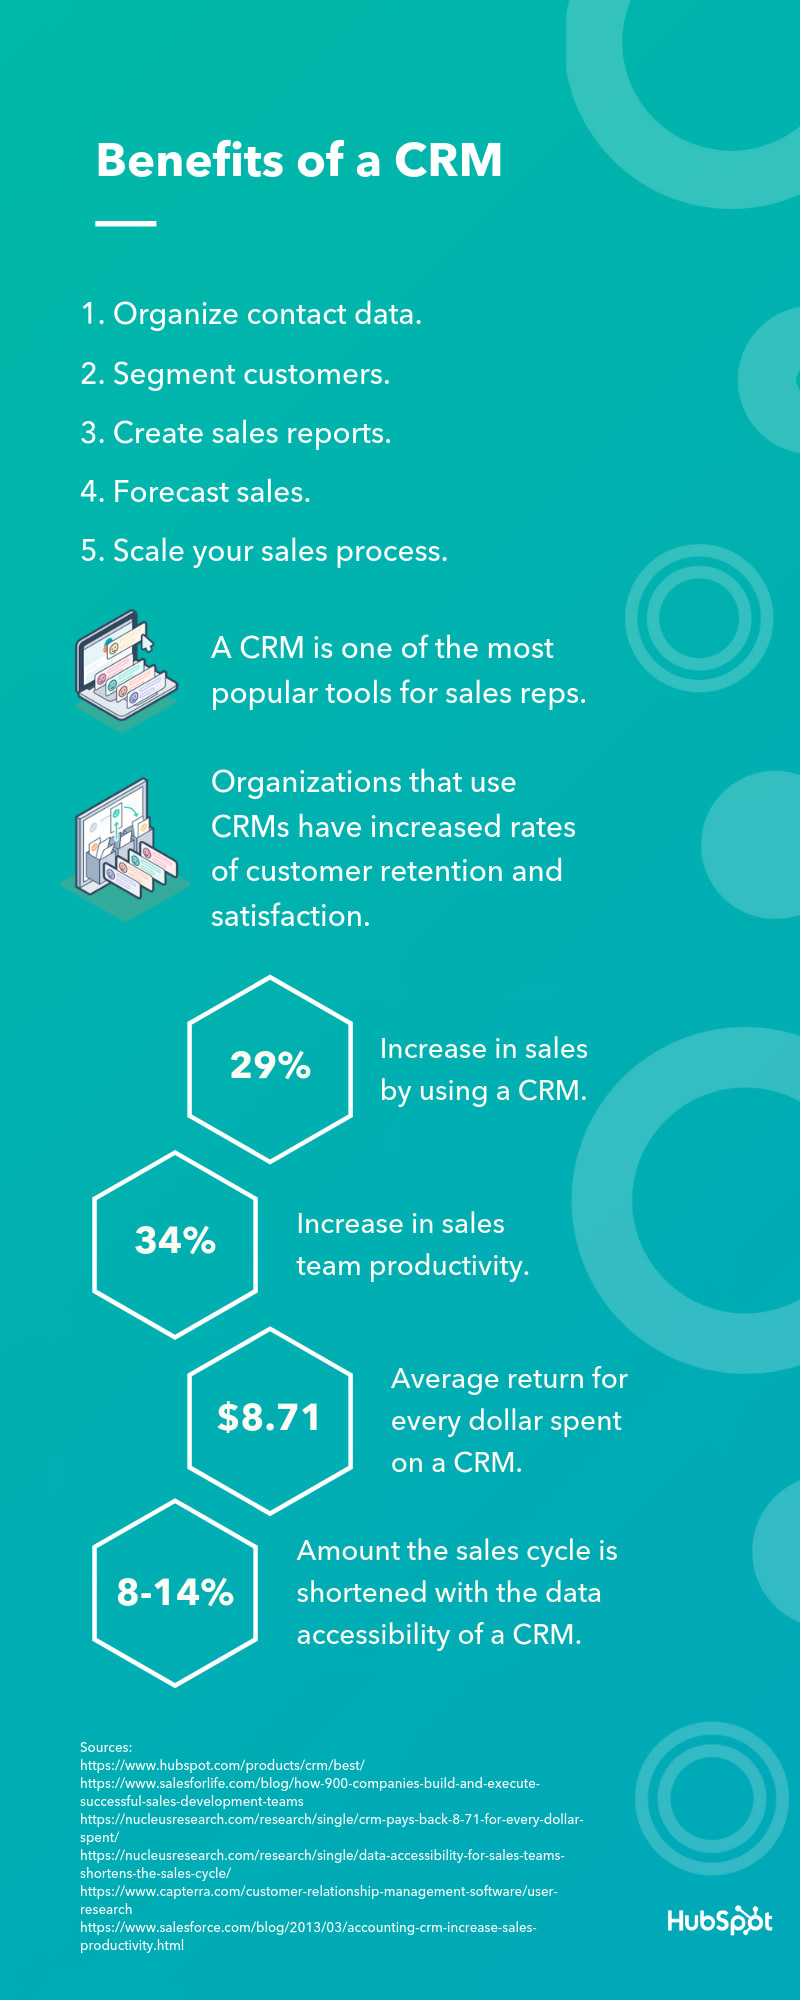 CRM SYSTEMS BENEFITS